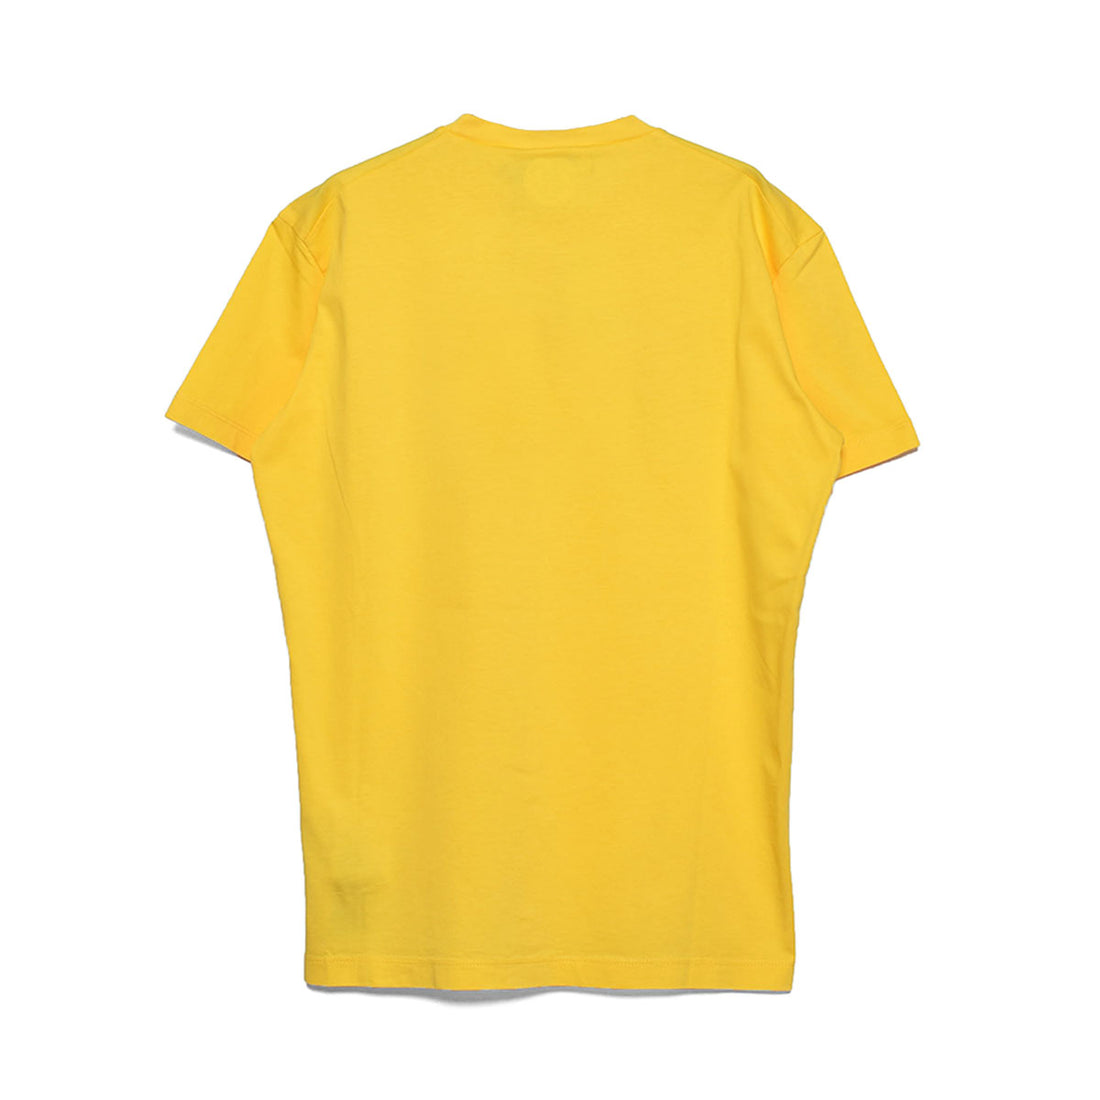 [DSQUARED2]COLORFUL LOGO T-SHIRT/YELLOW(S71GD1249)